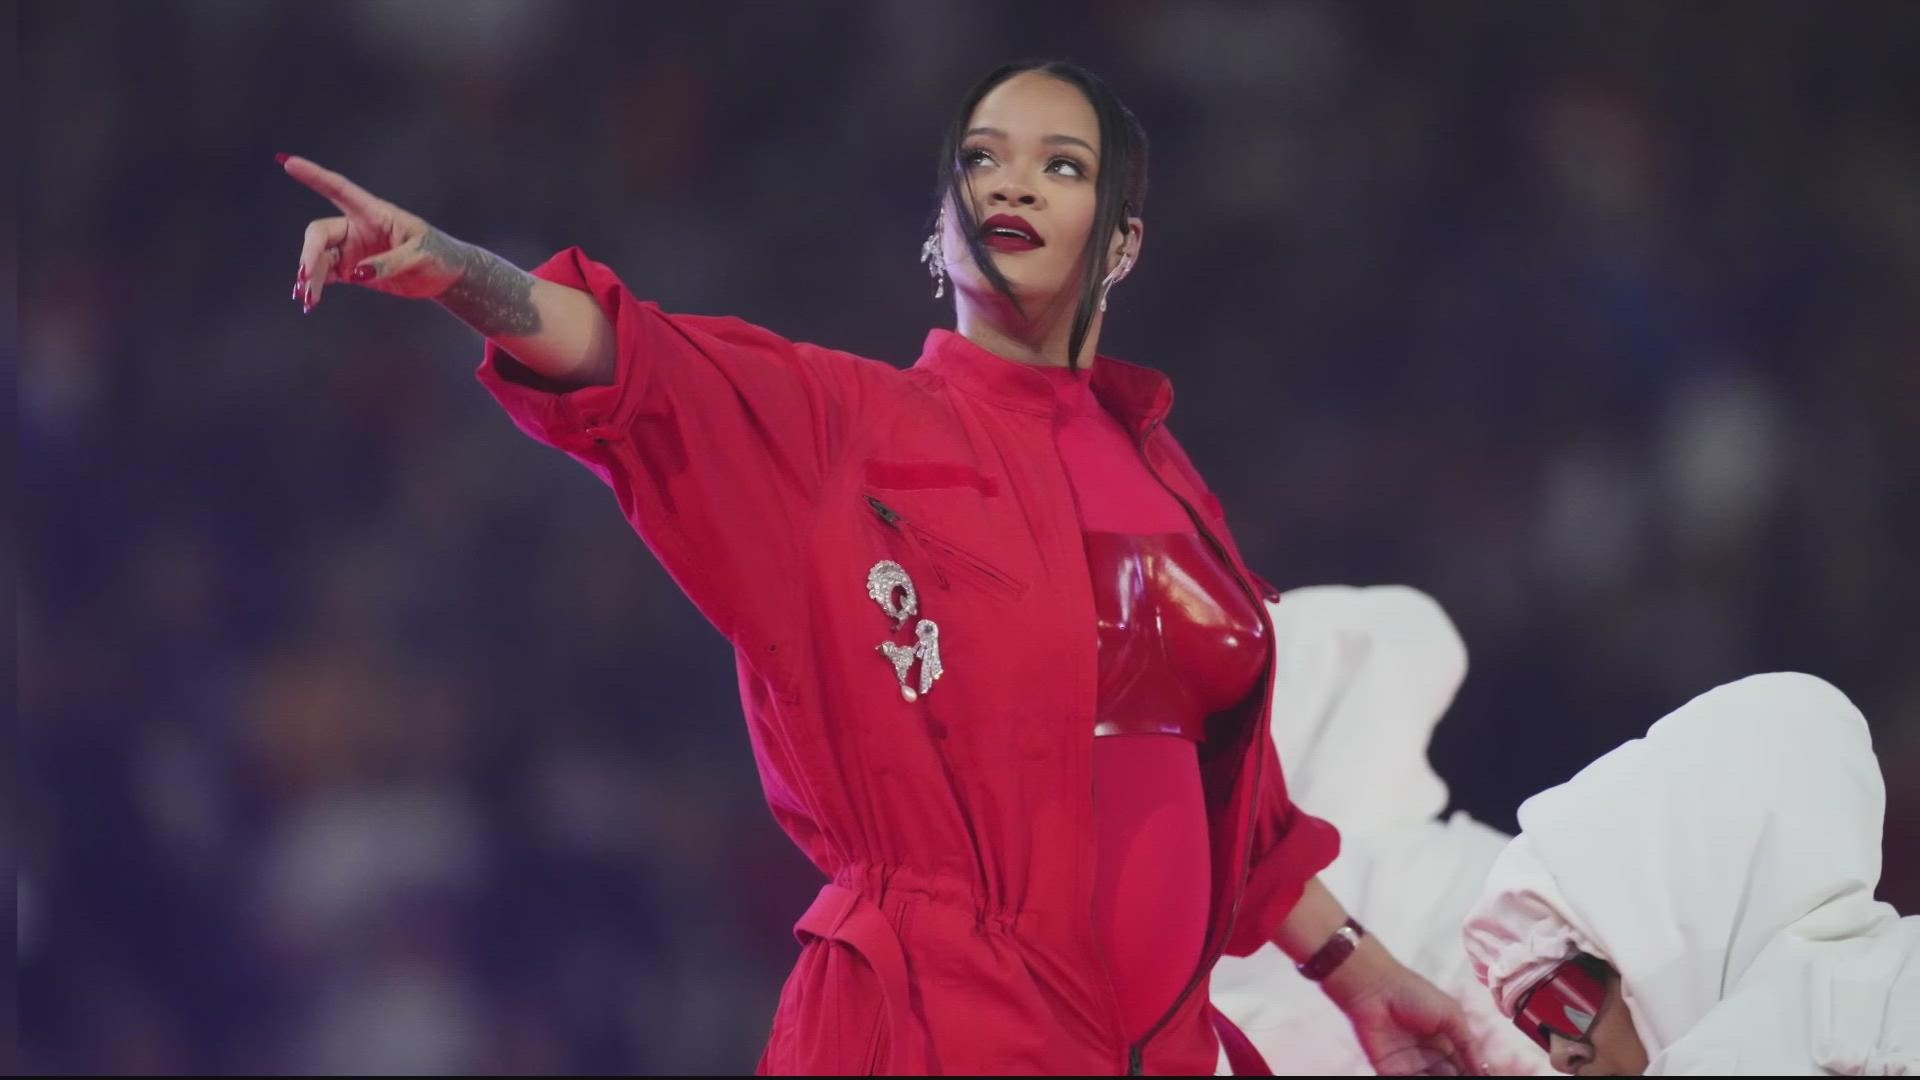 A representative for Rihanna has confirmed that the singer is pregnant after her explosive Super Bowl performance that had social media buzzing.